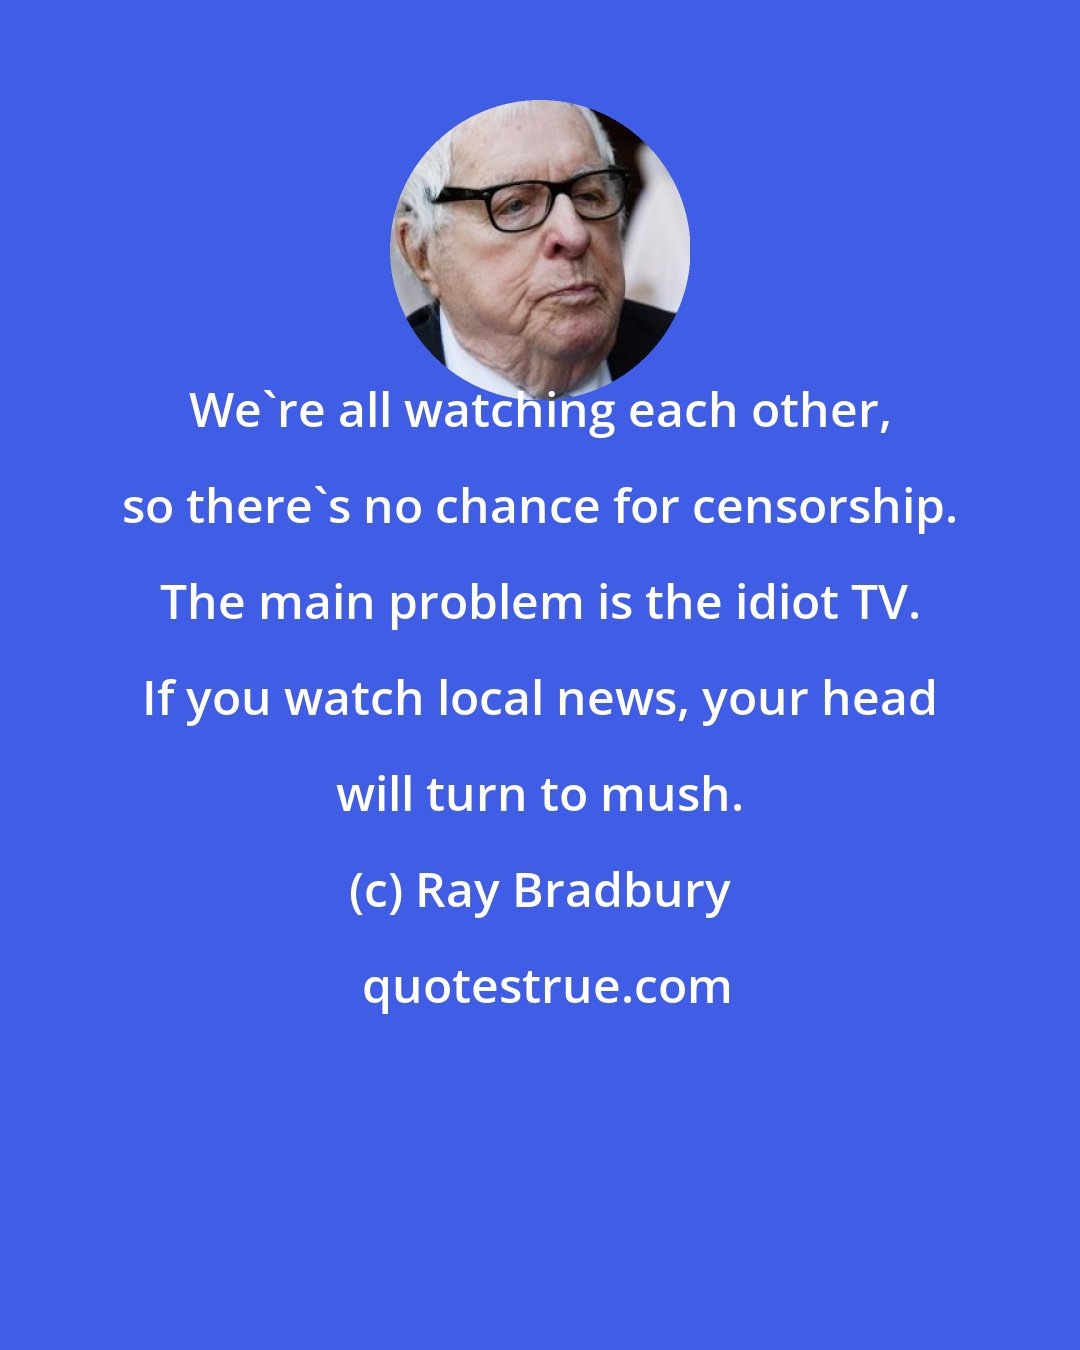 Ray Bradbury: We're all watching each other, so there's no chance for censorship. The main problem is the idiot TV. If you watch local news, your head will turn to mush.